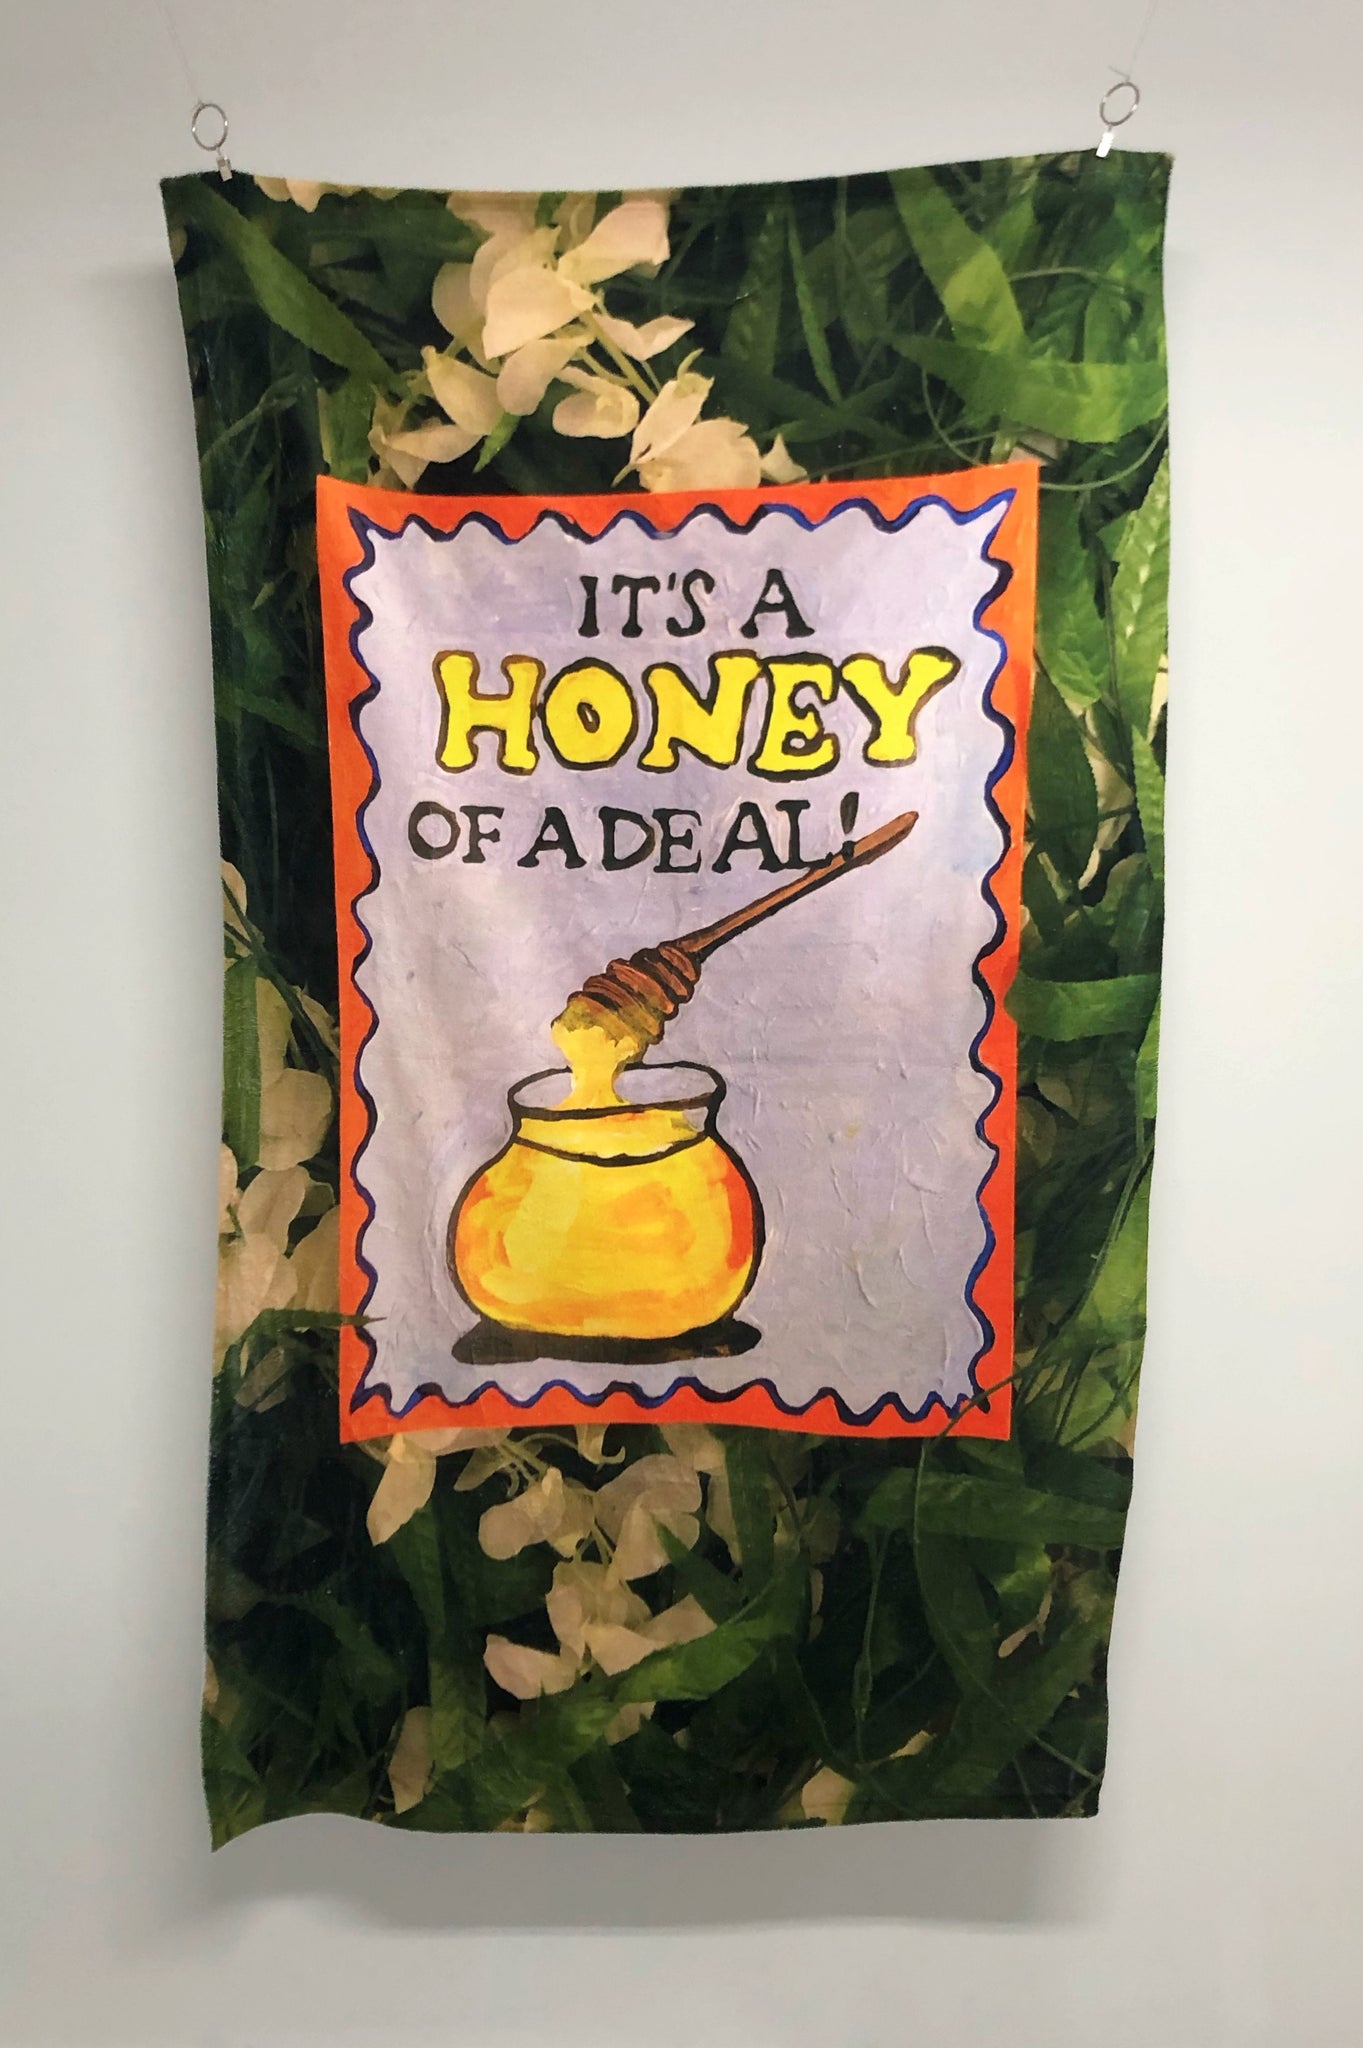 Kristin Hough, "It's A Honey Of A Deal!"